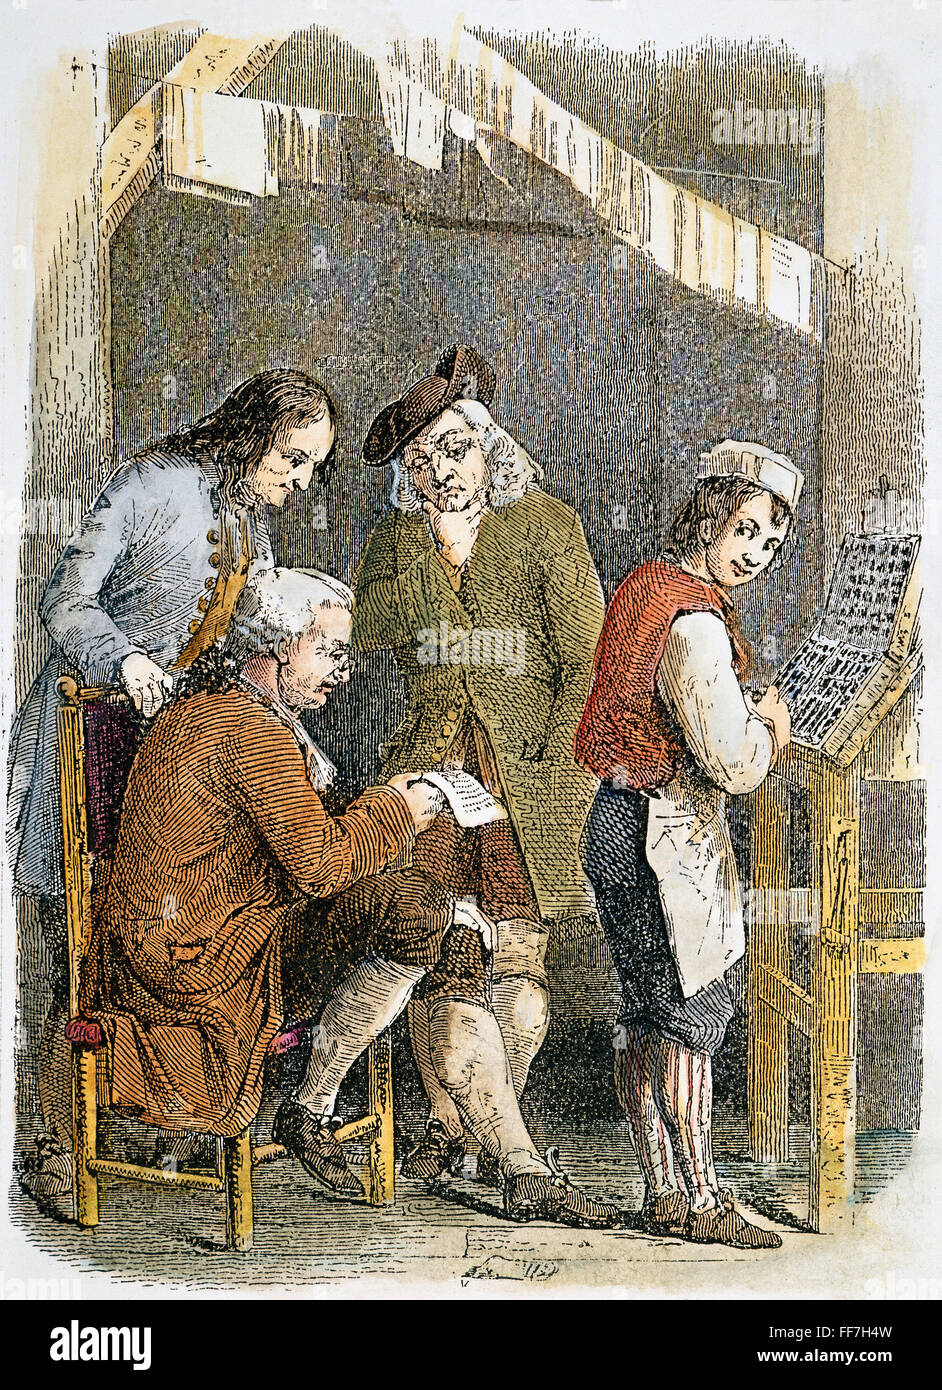 BENJAMIN FRANKLIN /n(1706-1790). American printer, publisher, scientist, inventor, statesman and diplomat. Franklin, far right, as an apprentice in his brother James' printing shop in Boston: colored engraving, 19th century. Stock Photo